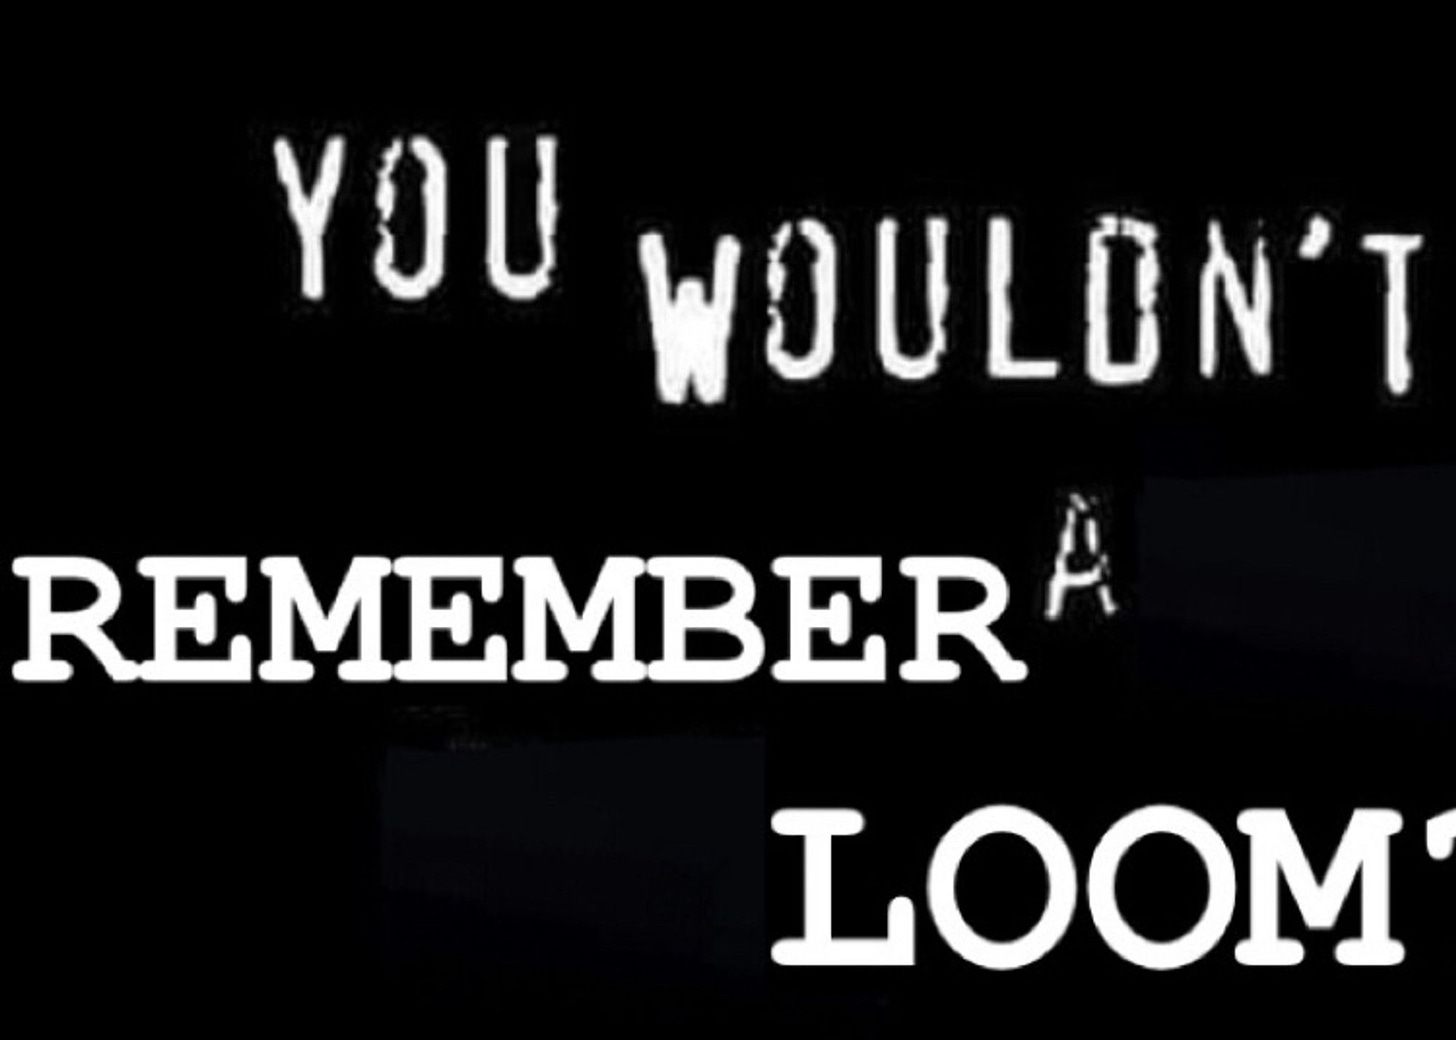 Parody of the "you wouldn't steal a car" anti-piracy ad that reads "you wouldn't REMEMBER a LOOM"